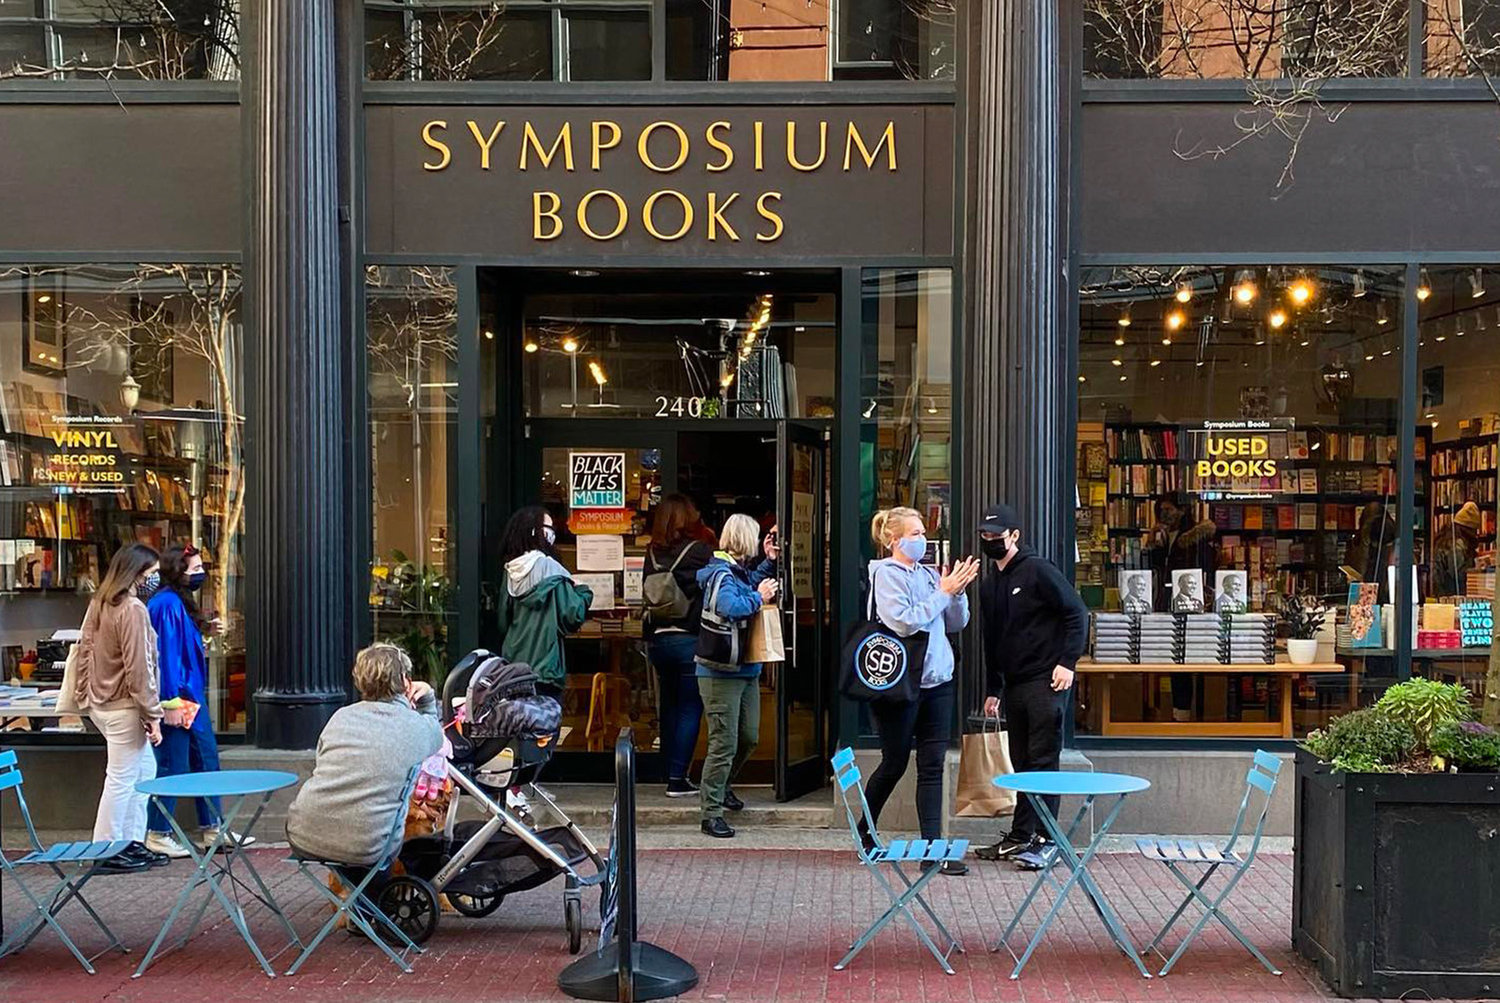 Symposium Books abuzz with activity on Westminster Street during Walk PVD’s Ped-Friendly Program